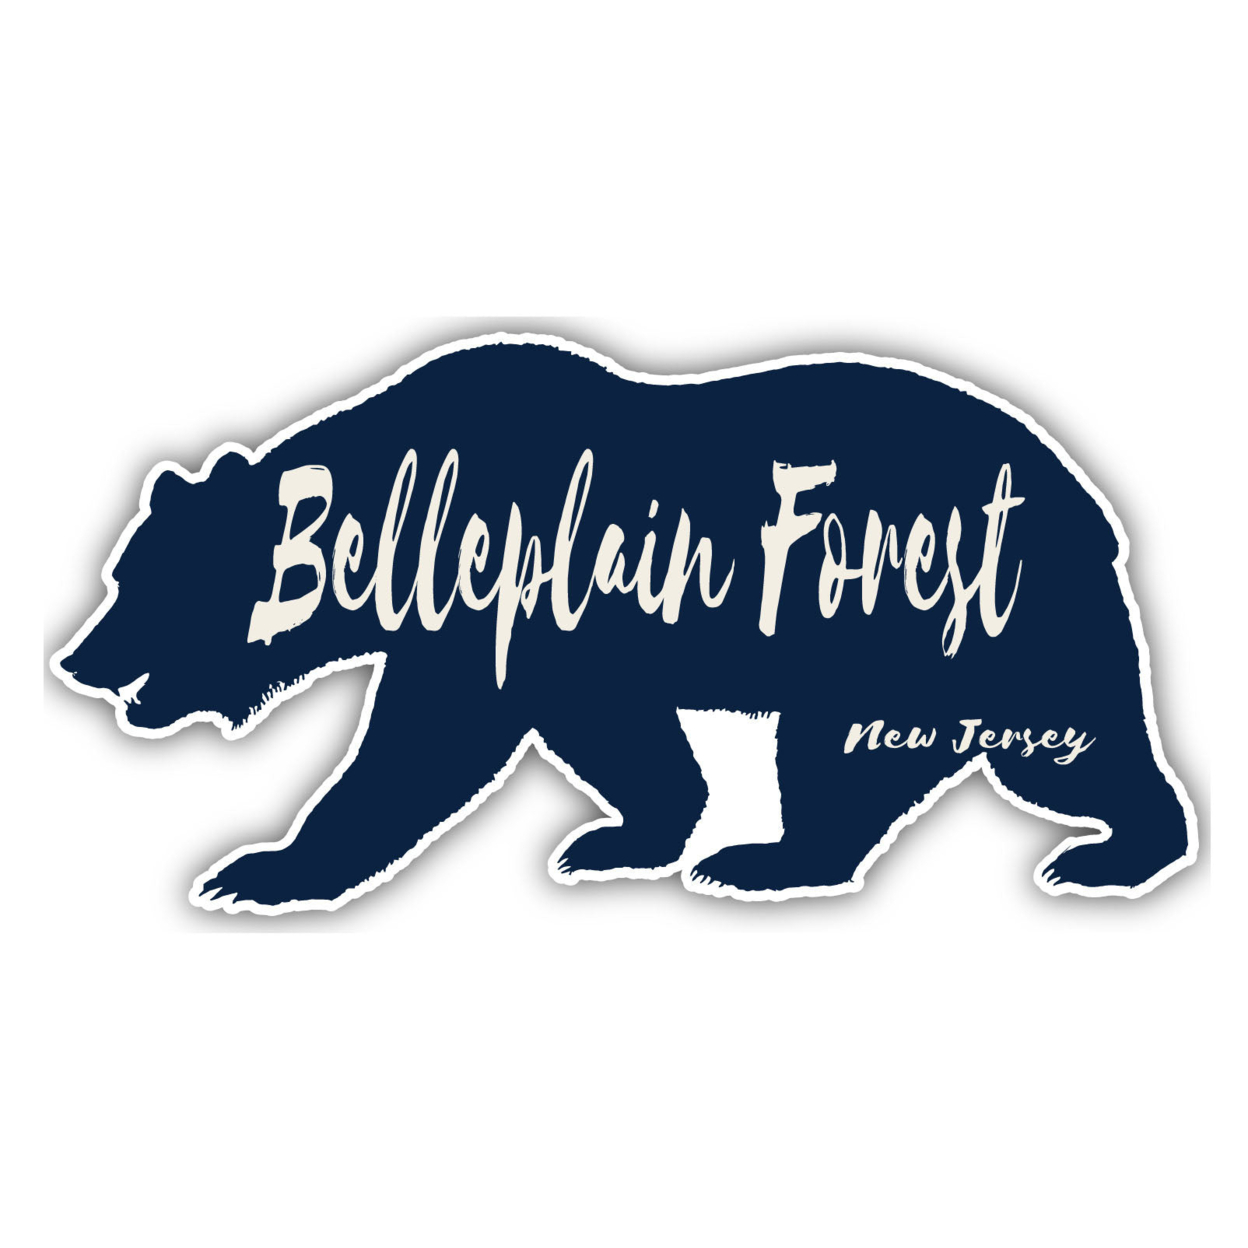 Belleplain Forest New Jersey Souvenir Decorative Stickers (Choose Theme And Size) - 4-Pack, 12-Inch, Bear